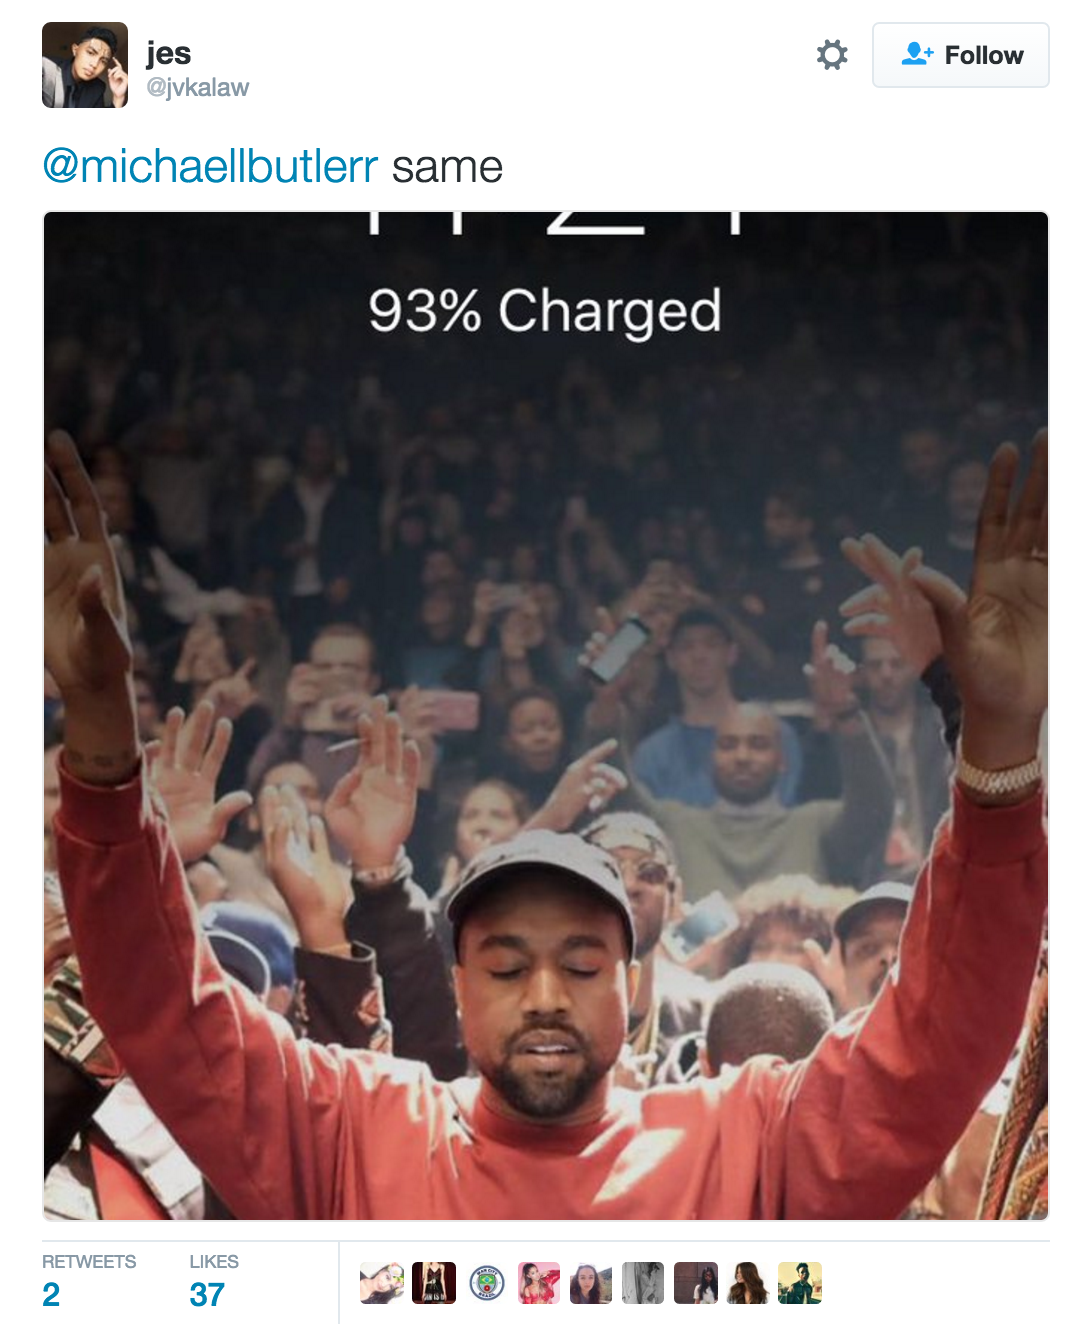 Kanye Hands Raised Wallpapers